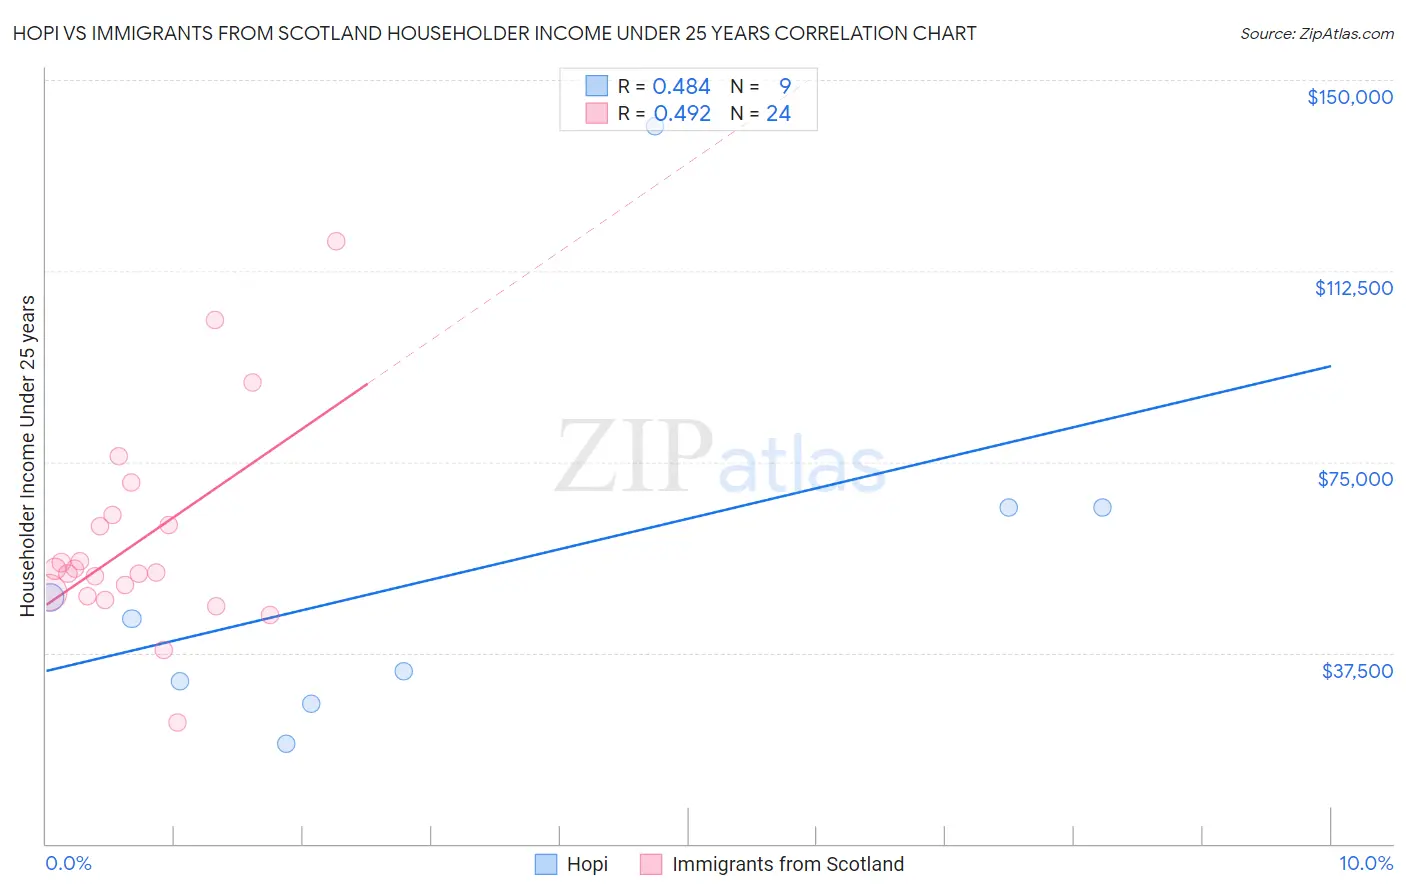 Hopi vs Immigrants from Scotland Householder Income Under 25 years